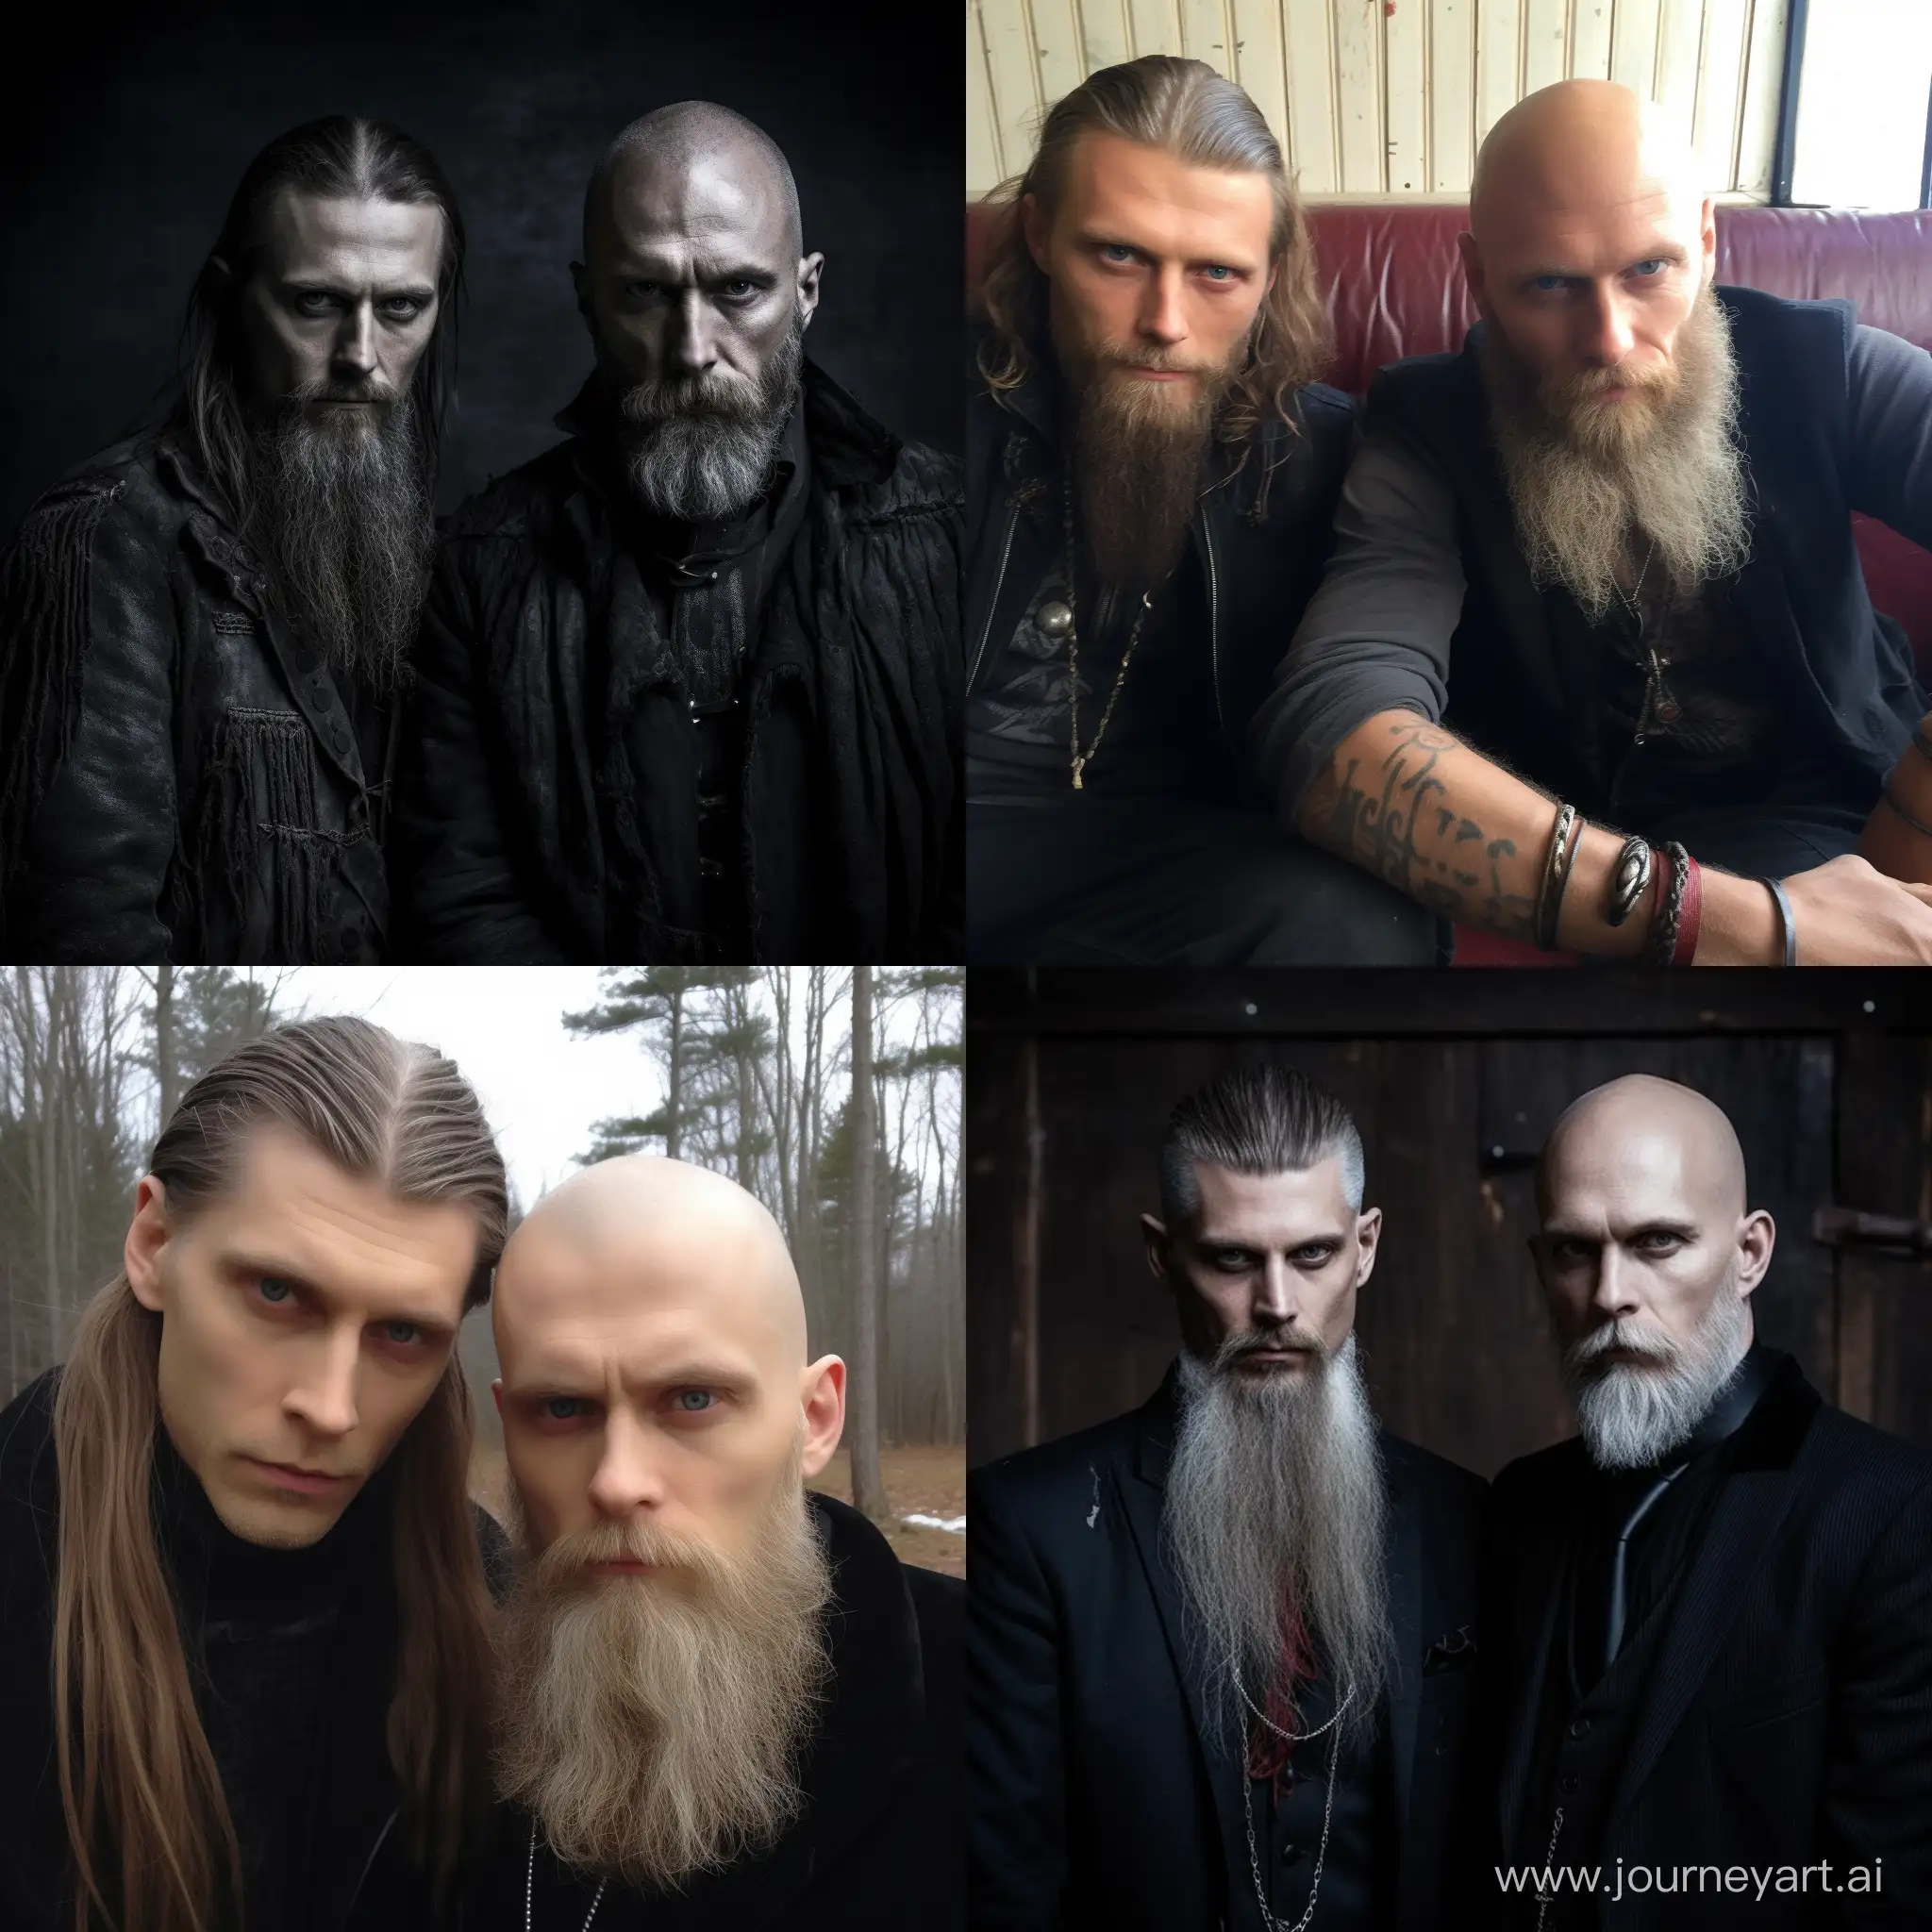 Klaus-Mikaelson-and-Varg-Vikernes-in-Intense-Confrontation-AR-11-Art